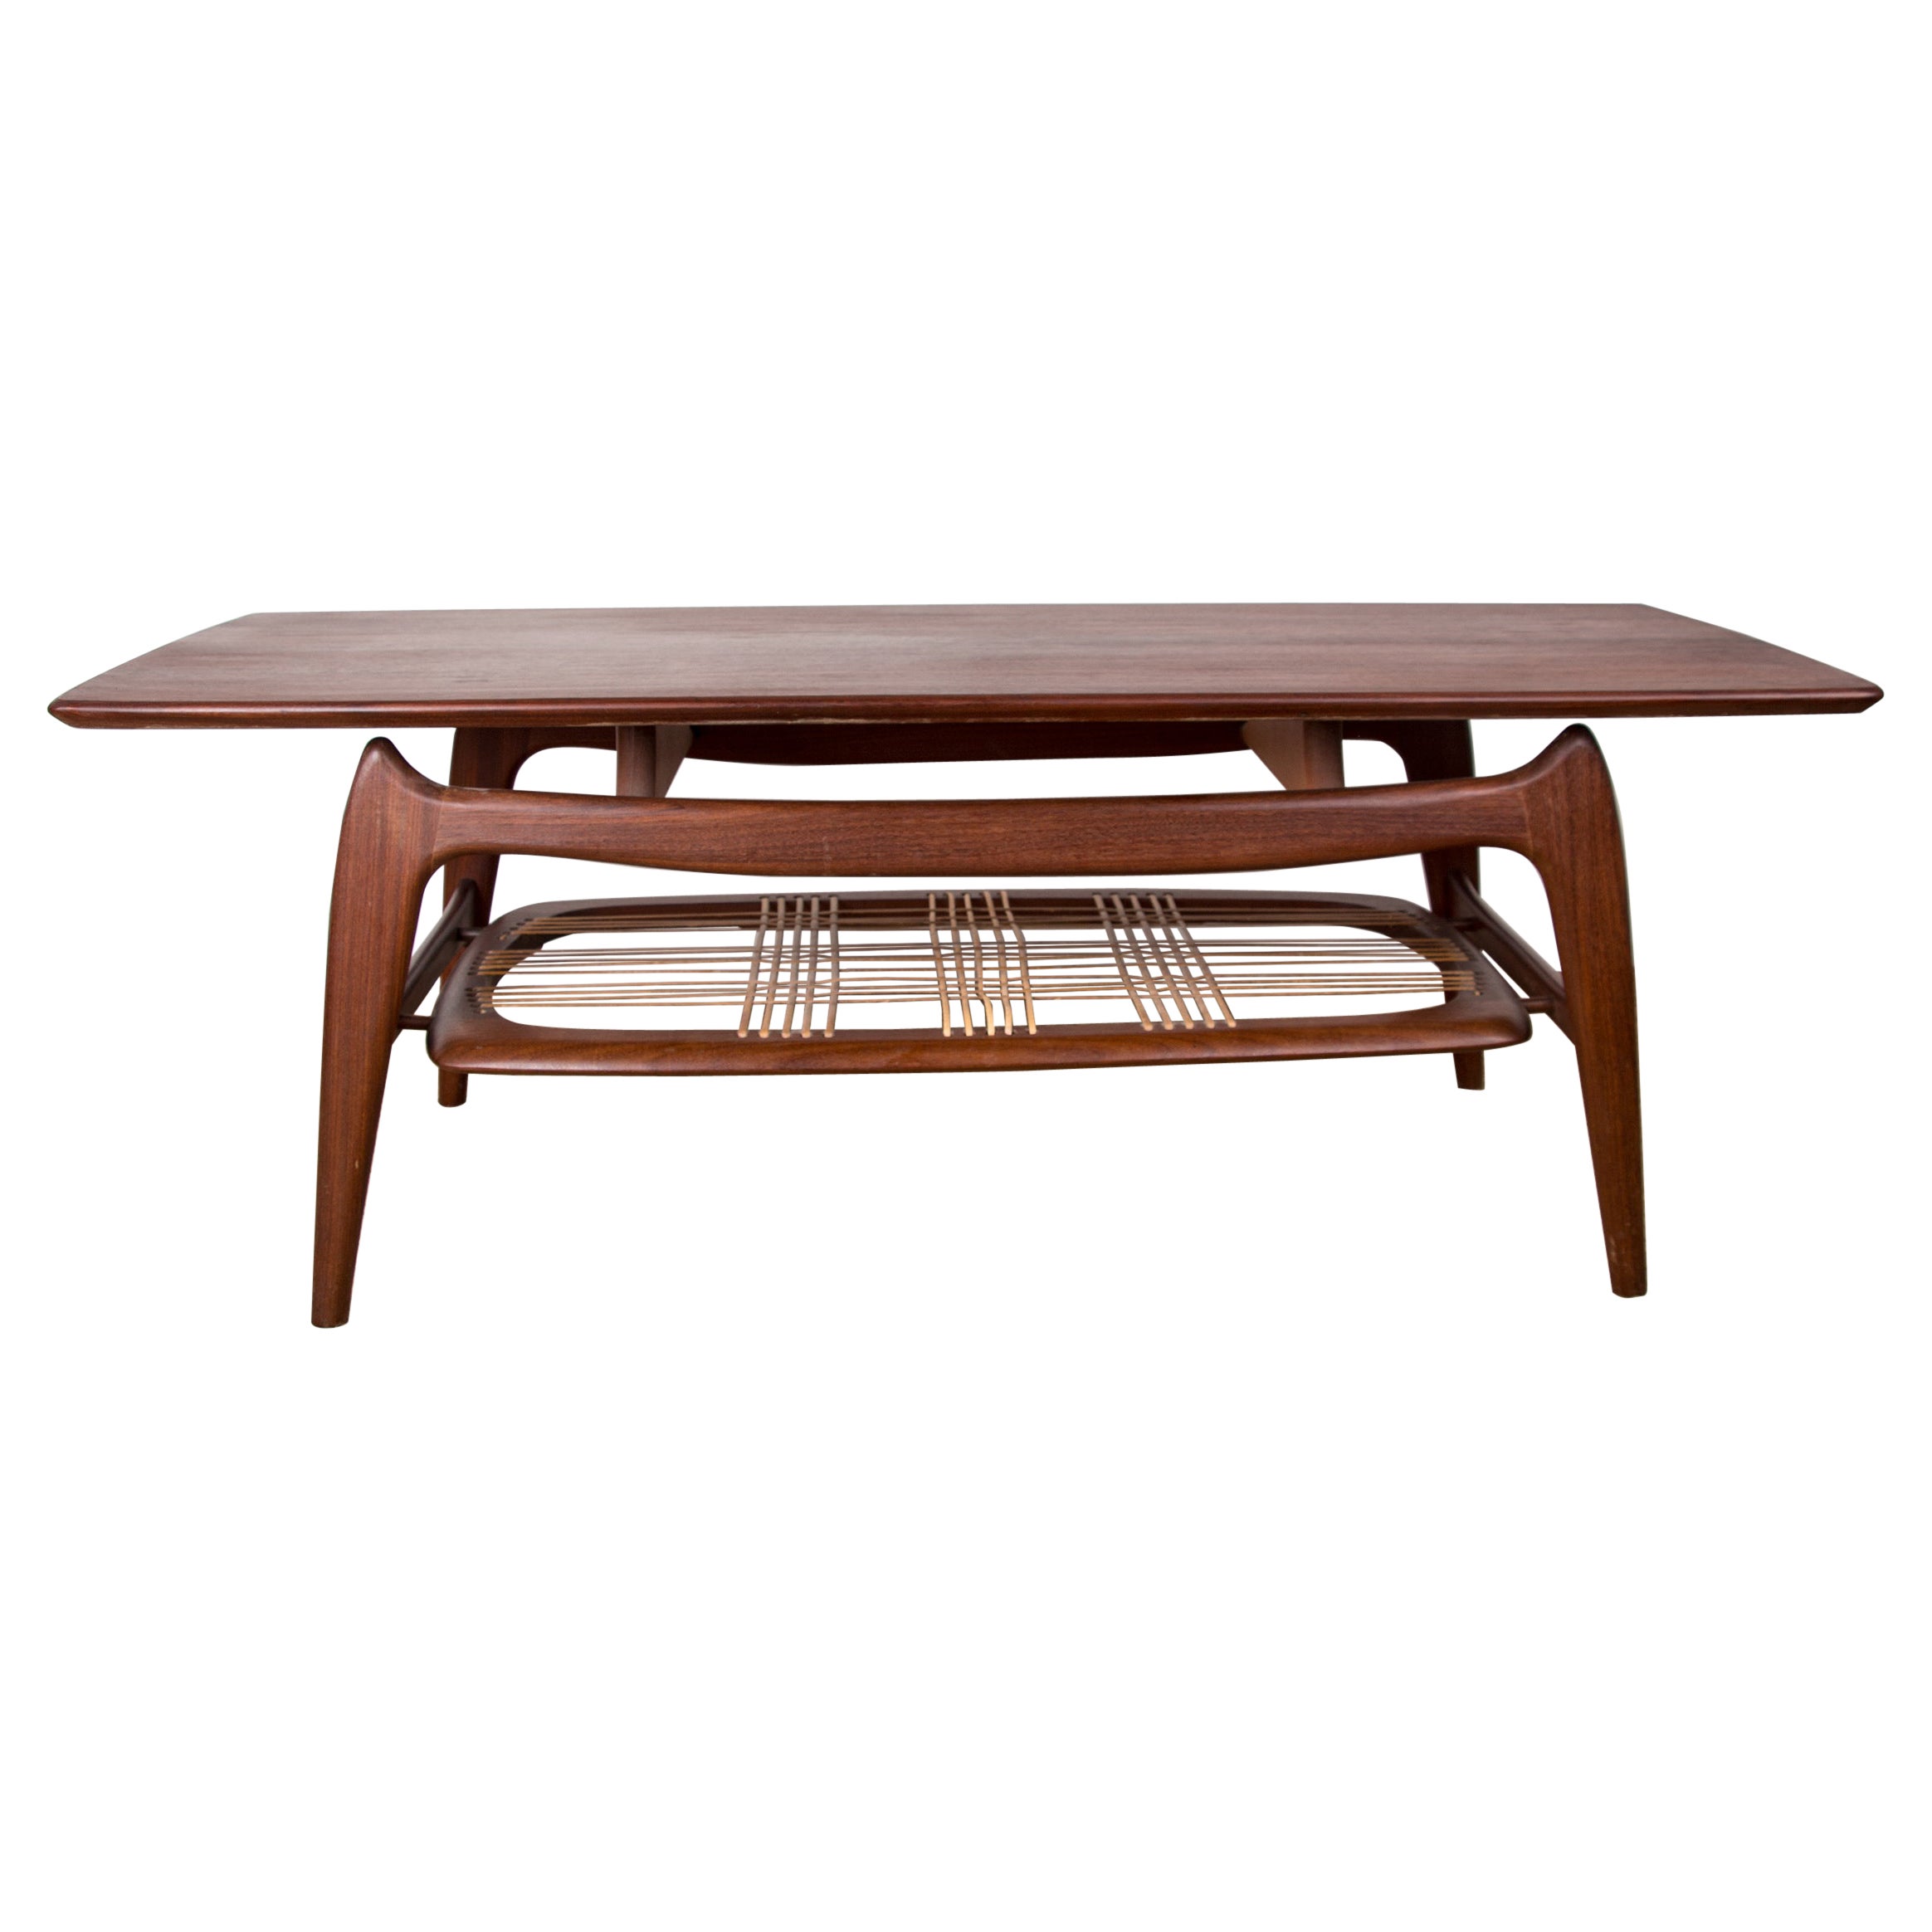 Large Coffee Table, 2 levels, in Teak and Rattan, Louis van Teeffelen for WéBé. For Sale